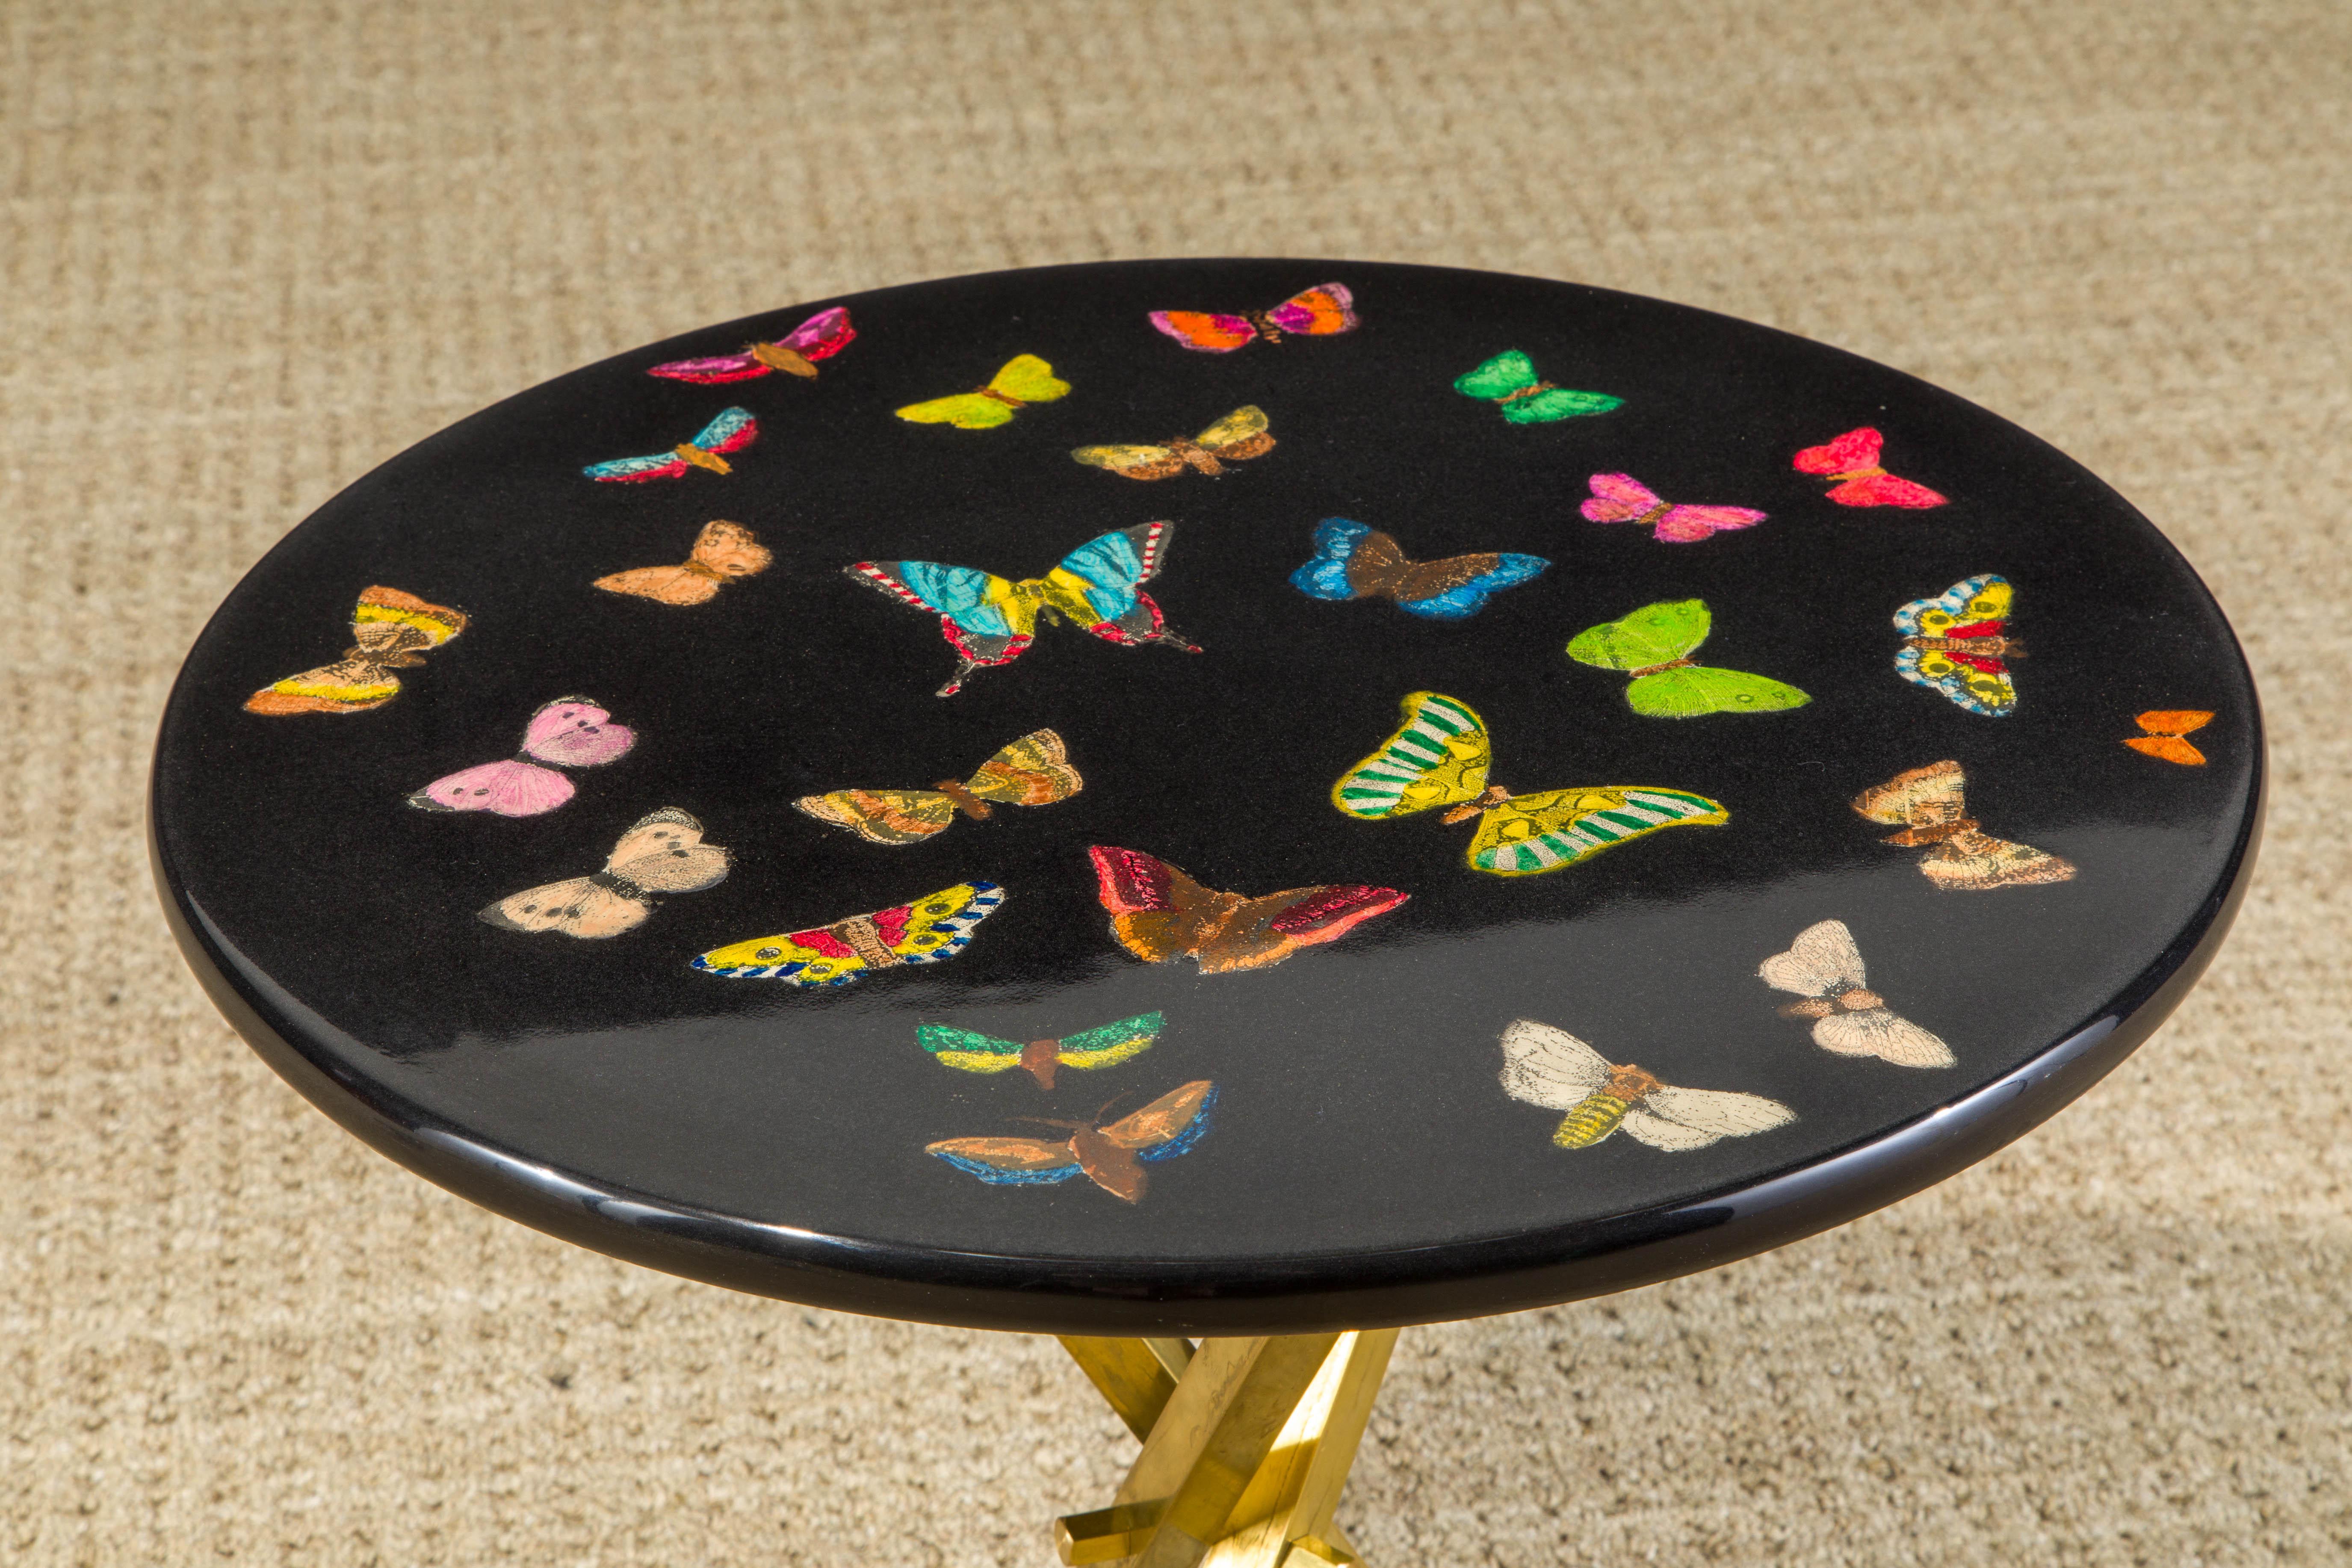 Lacquered 'Butterflies' Side Table / Drinks Table by Piero Fornasetti, Signed 